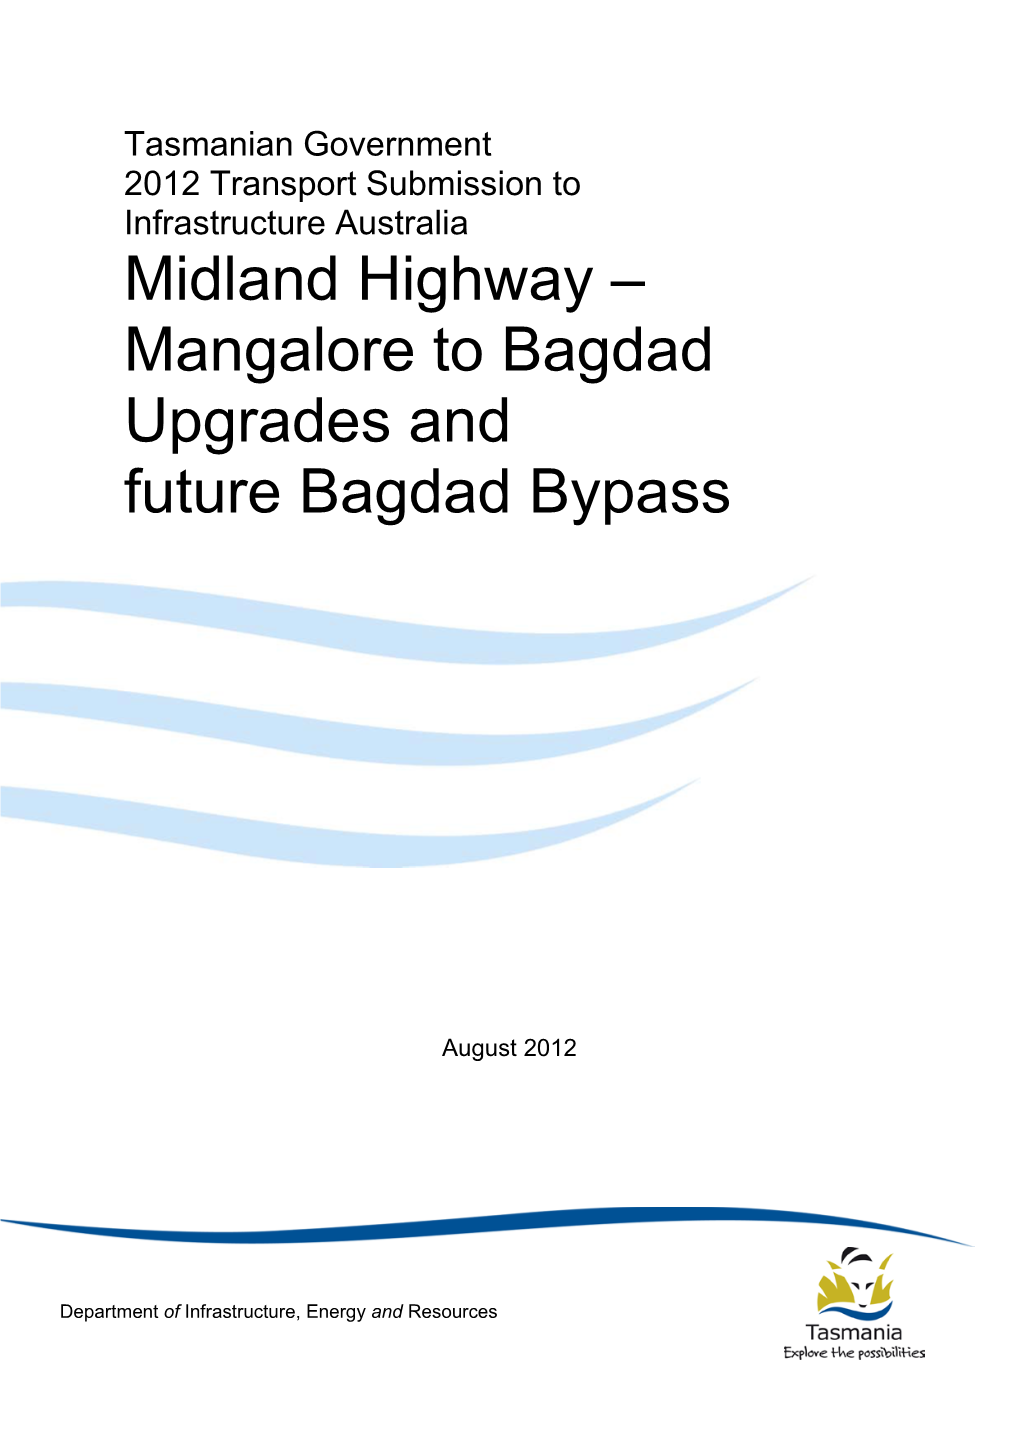 Midland Highway – Mangalore to Bagdad Upgrades and Future Bagdad Bypass